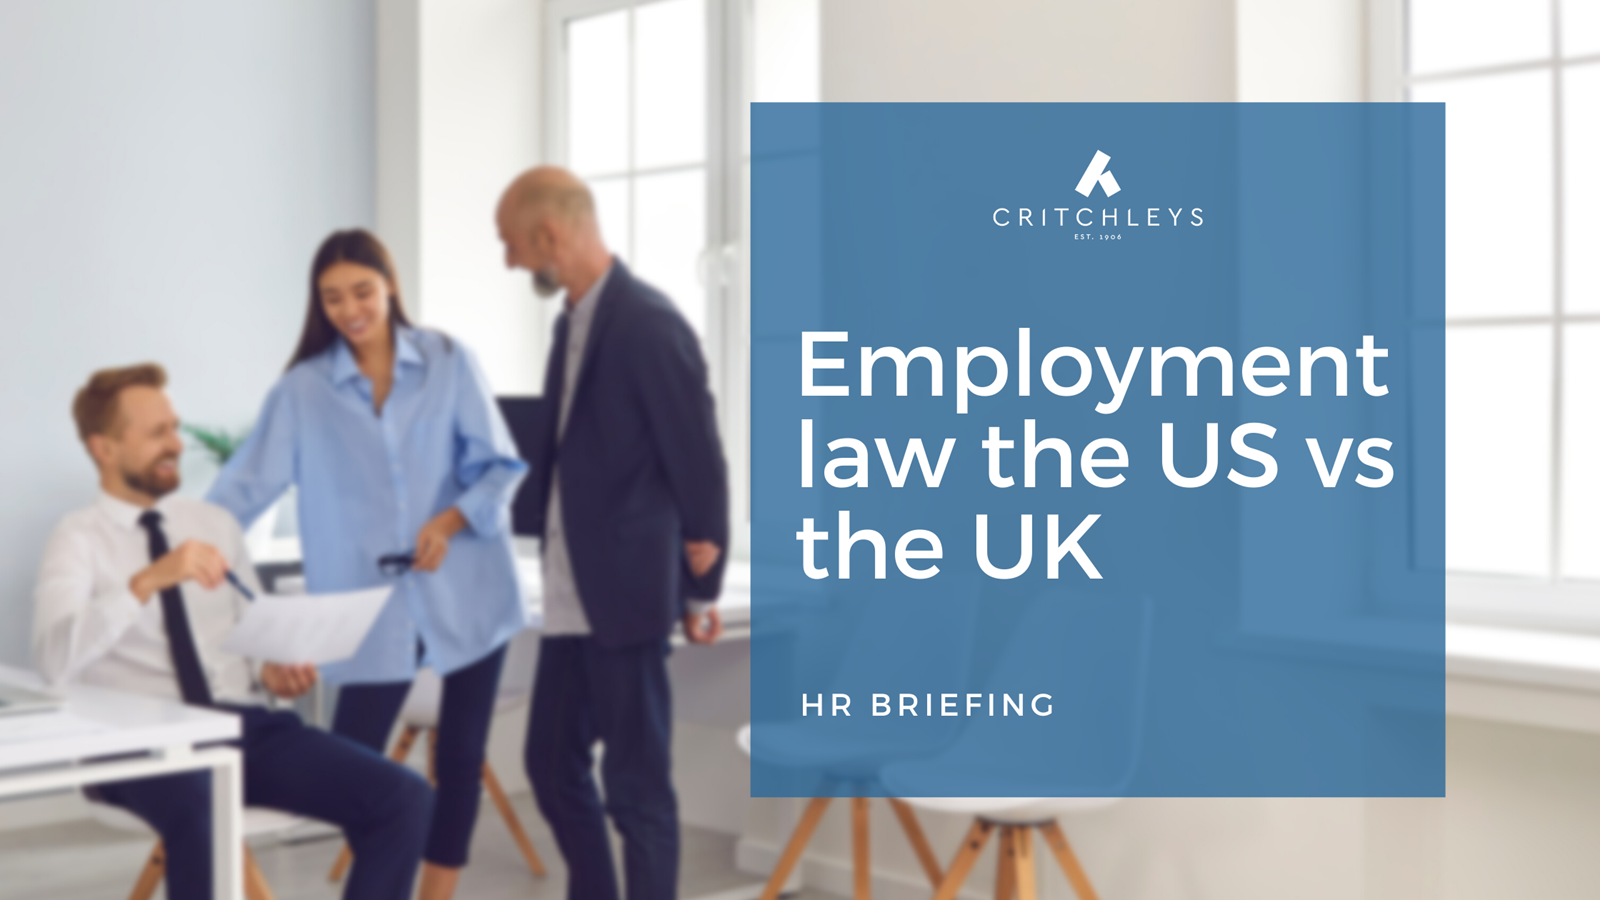 Employment law the US vs the UK